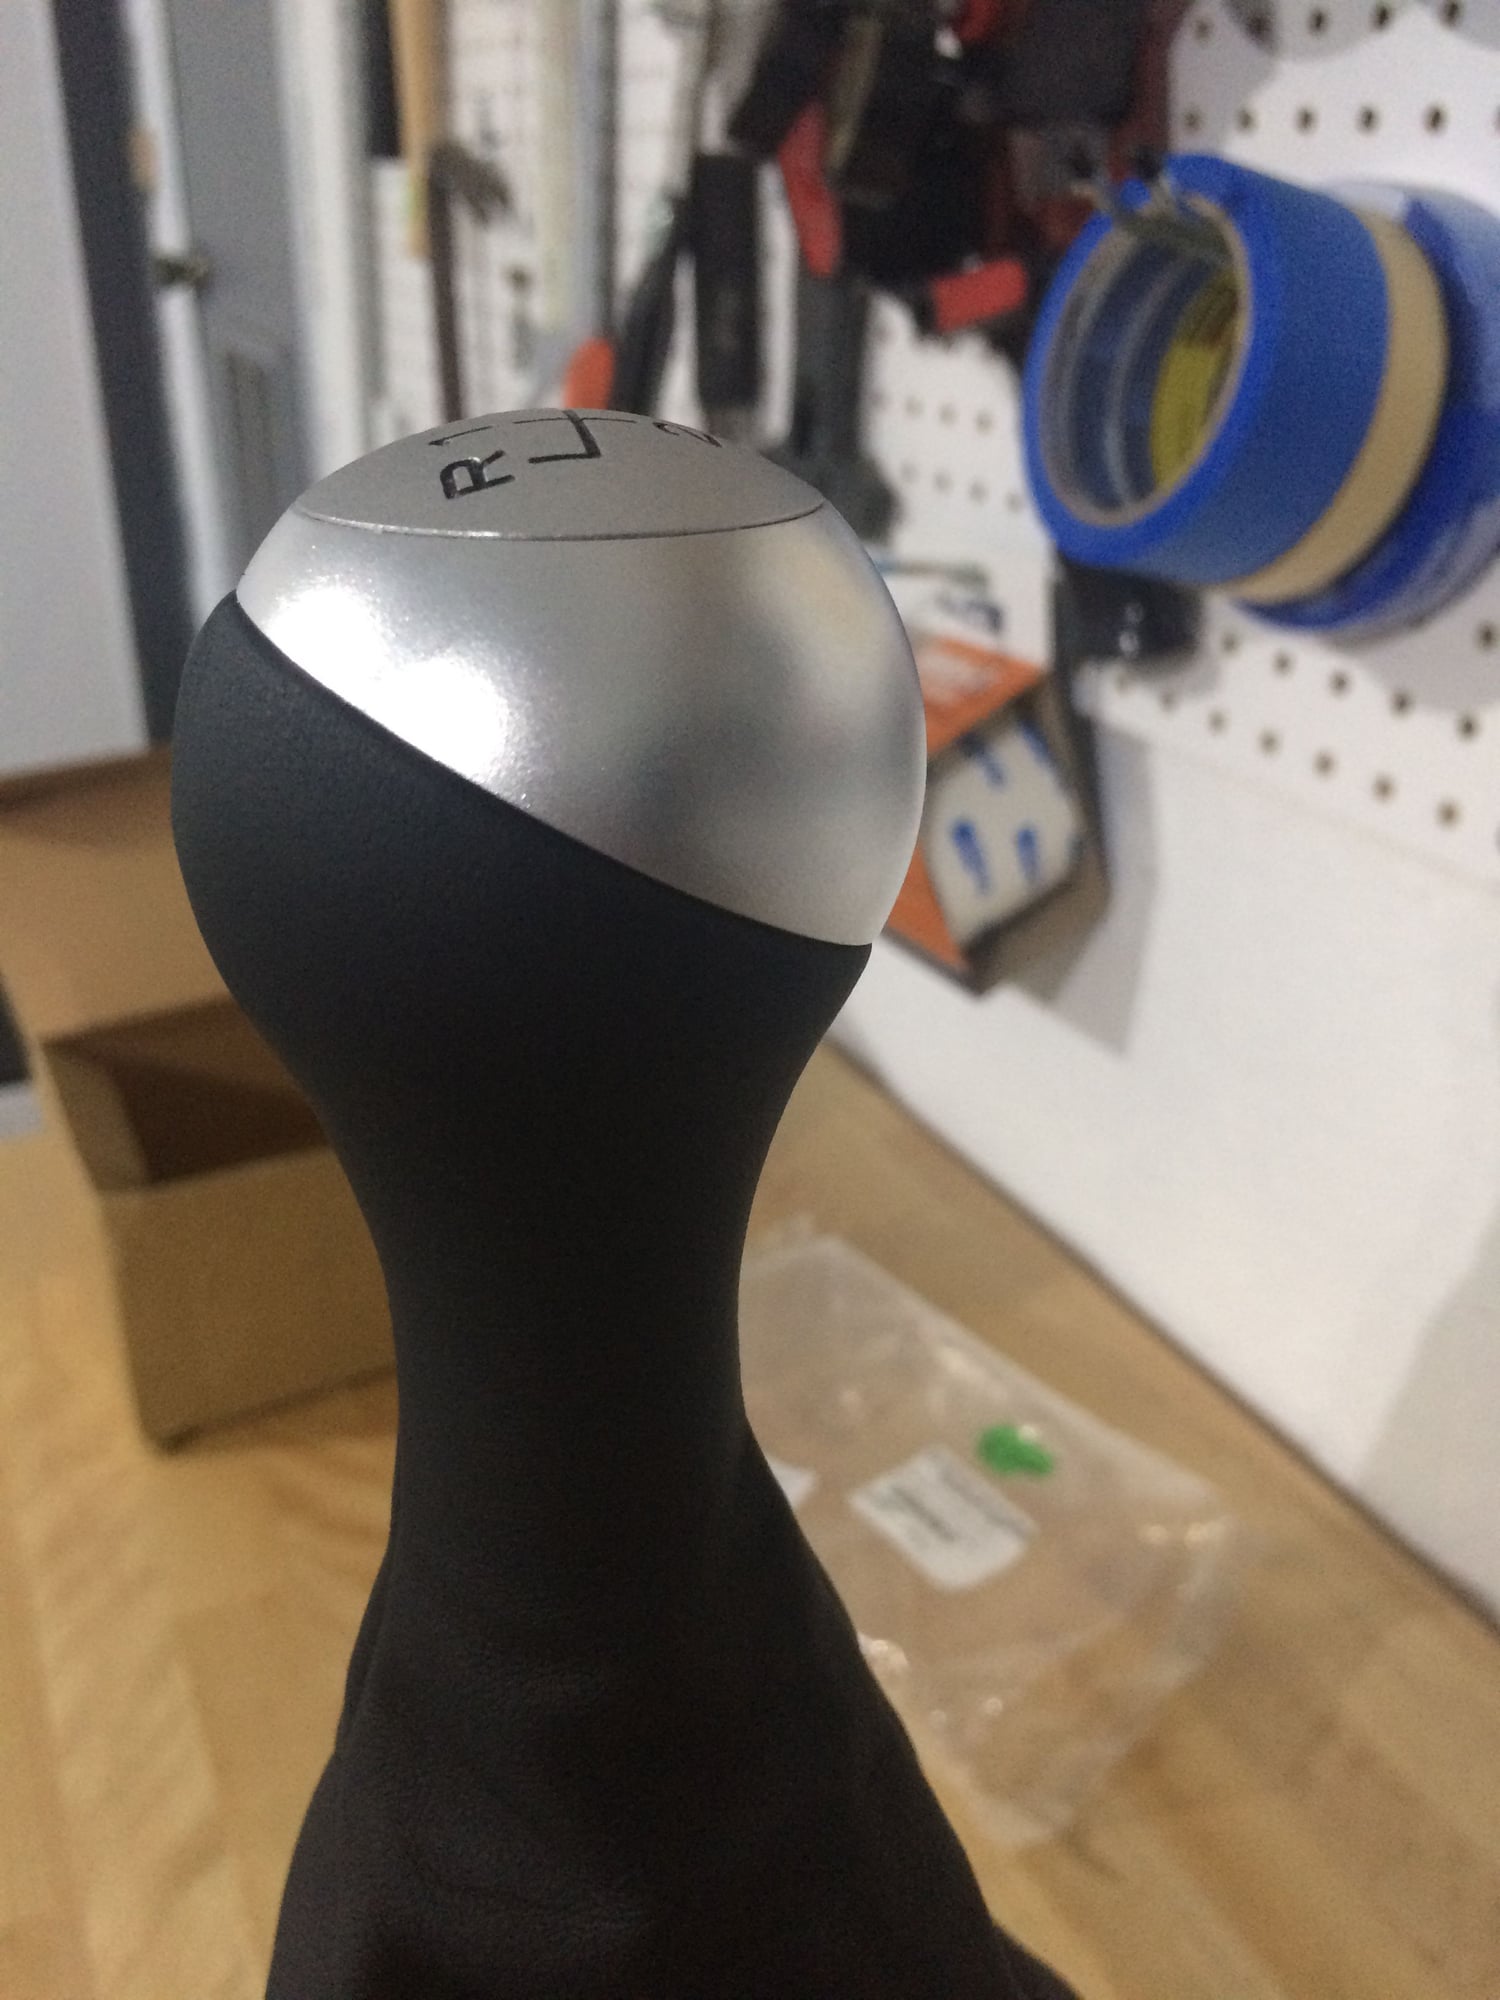 Interior/Upholstery - Aluminum / Leather Tequipment weighted shift knob - Used - Mill Creek, WA 98012, United States